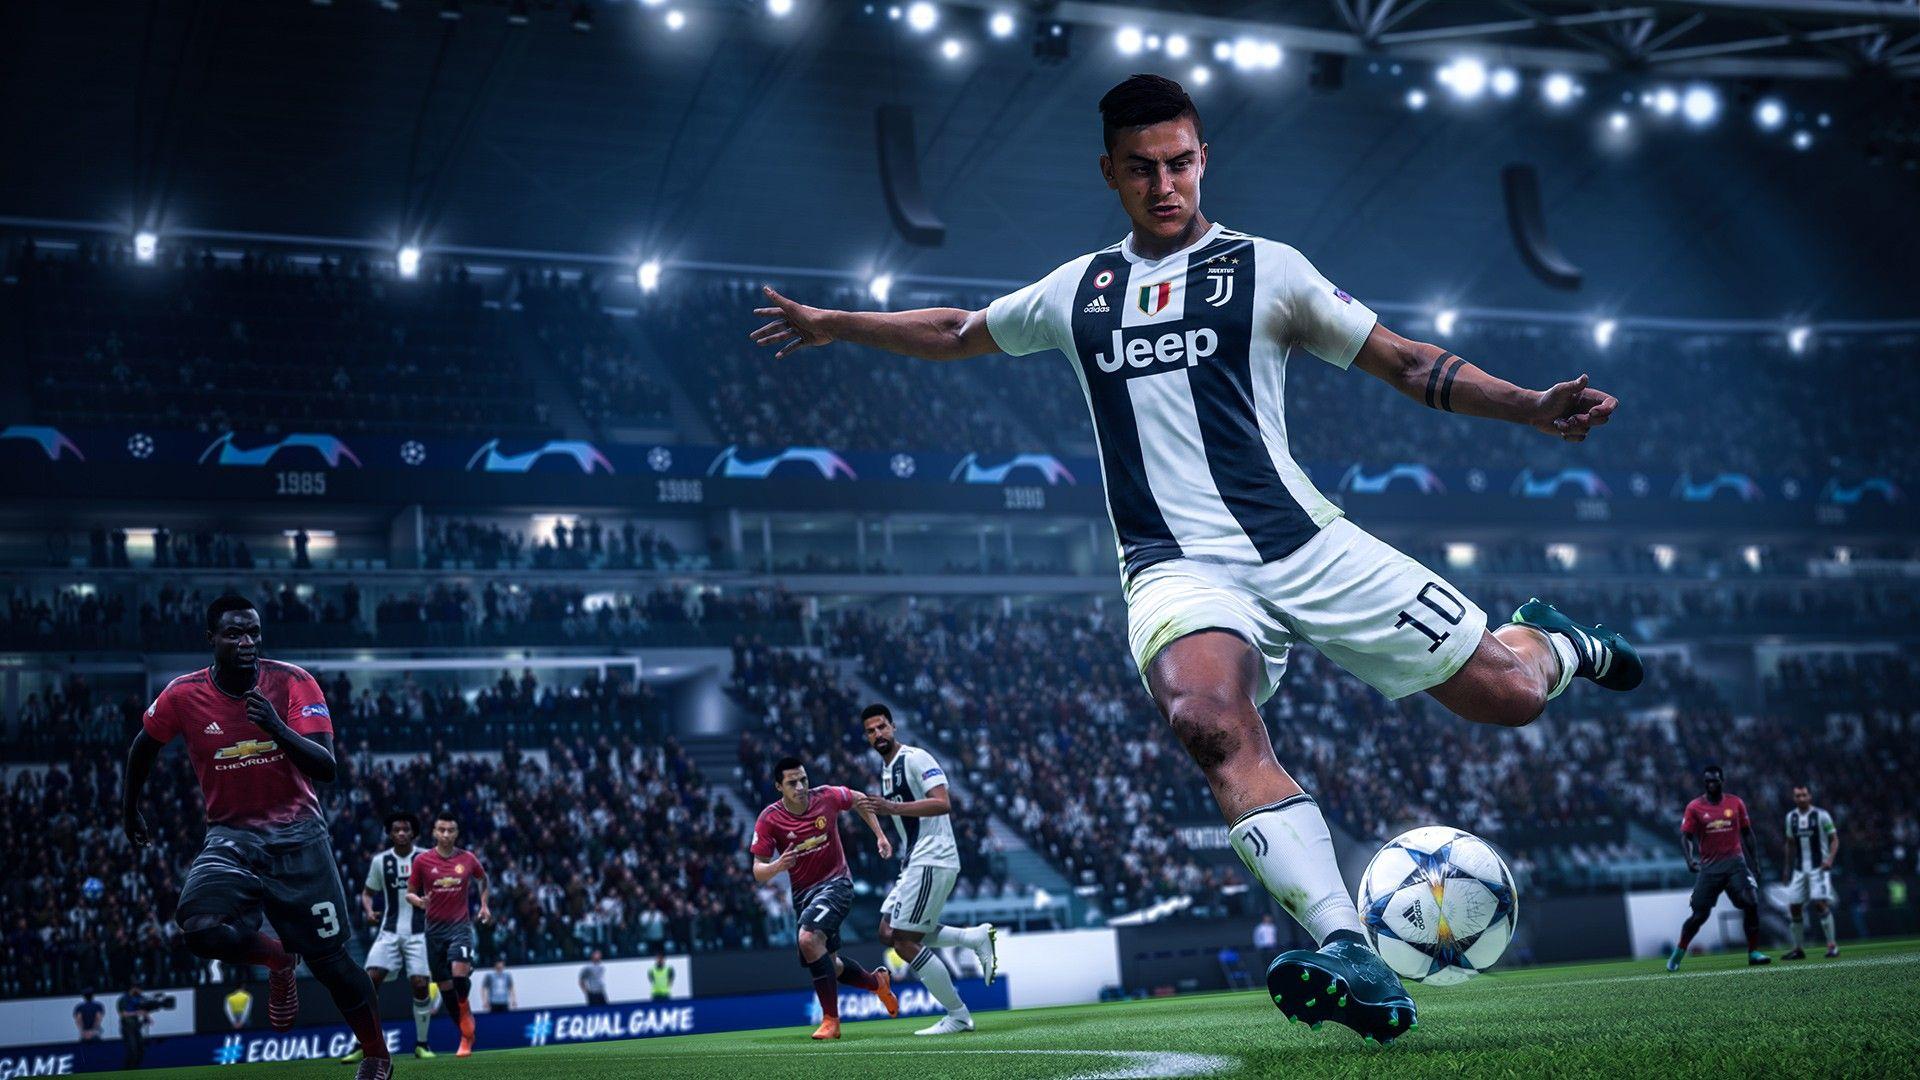 FIFA 19 for PC